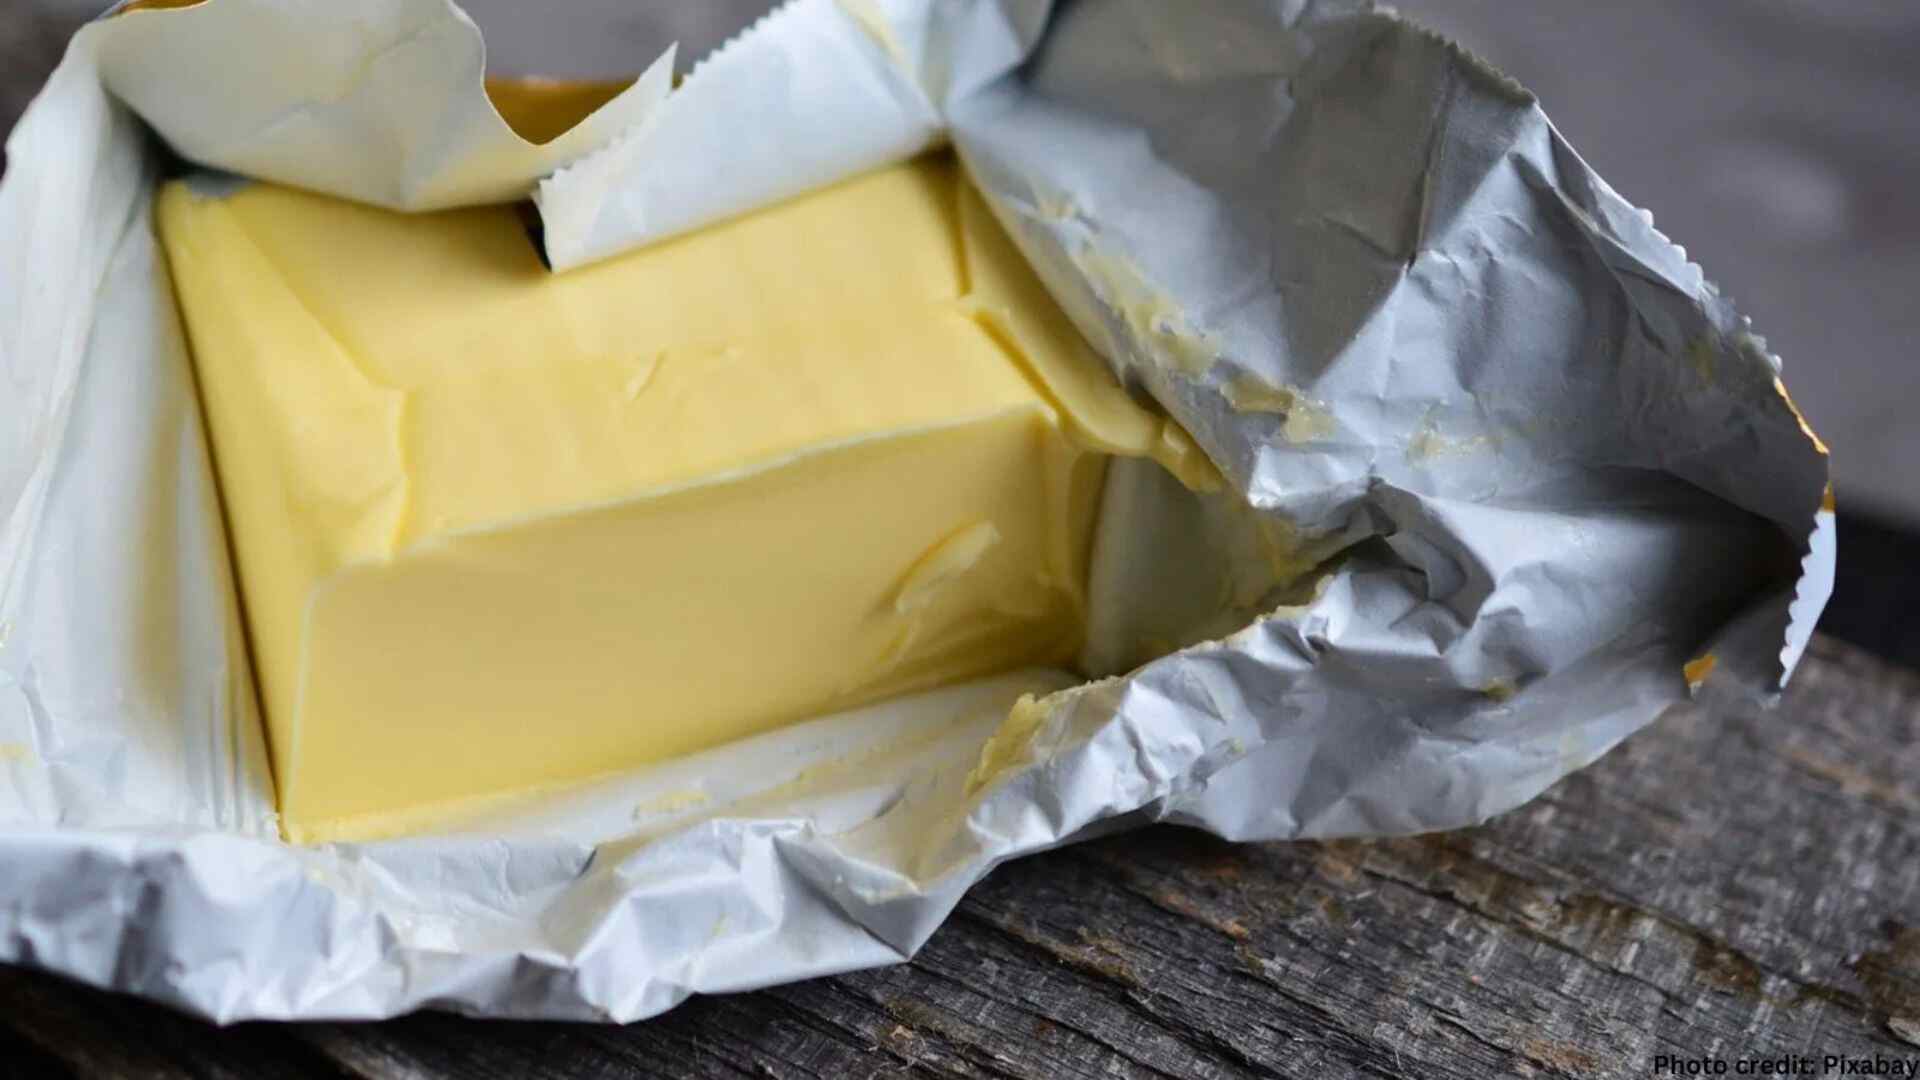 California Startup Creates Butter From CO2, Claims It Tastes ‘Like The Real Thing’